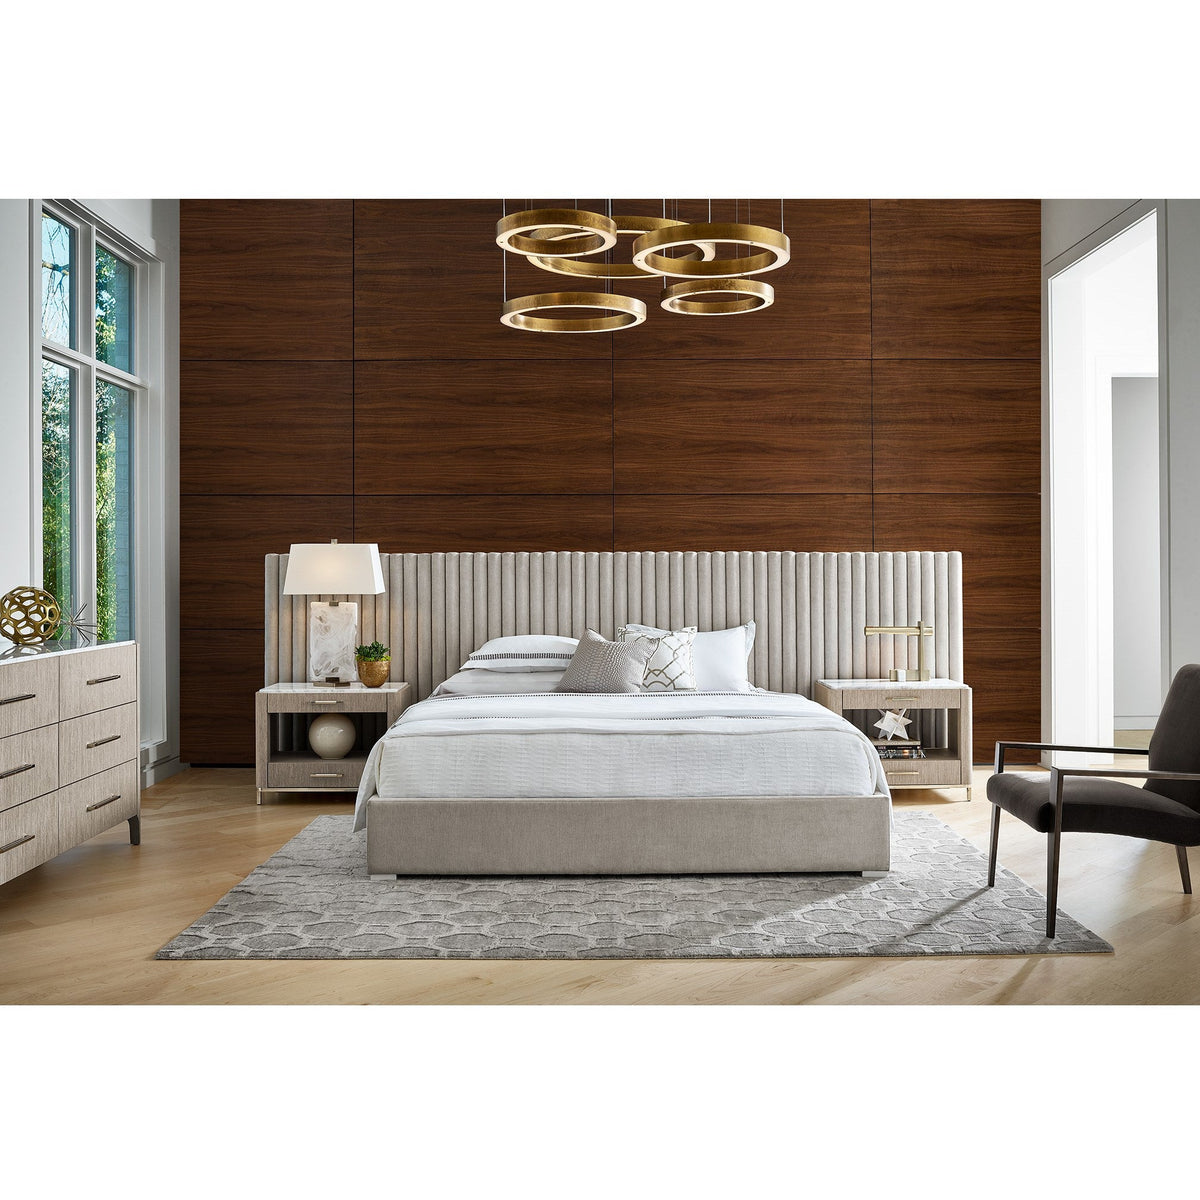 Decker Wall Bed With Panels - Be Bold Furniture